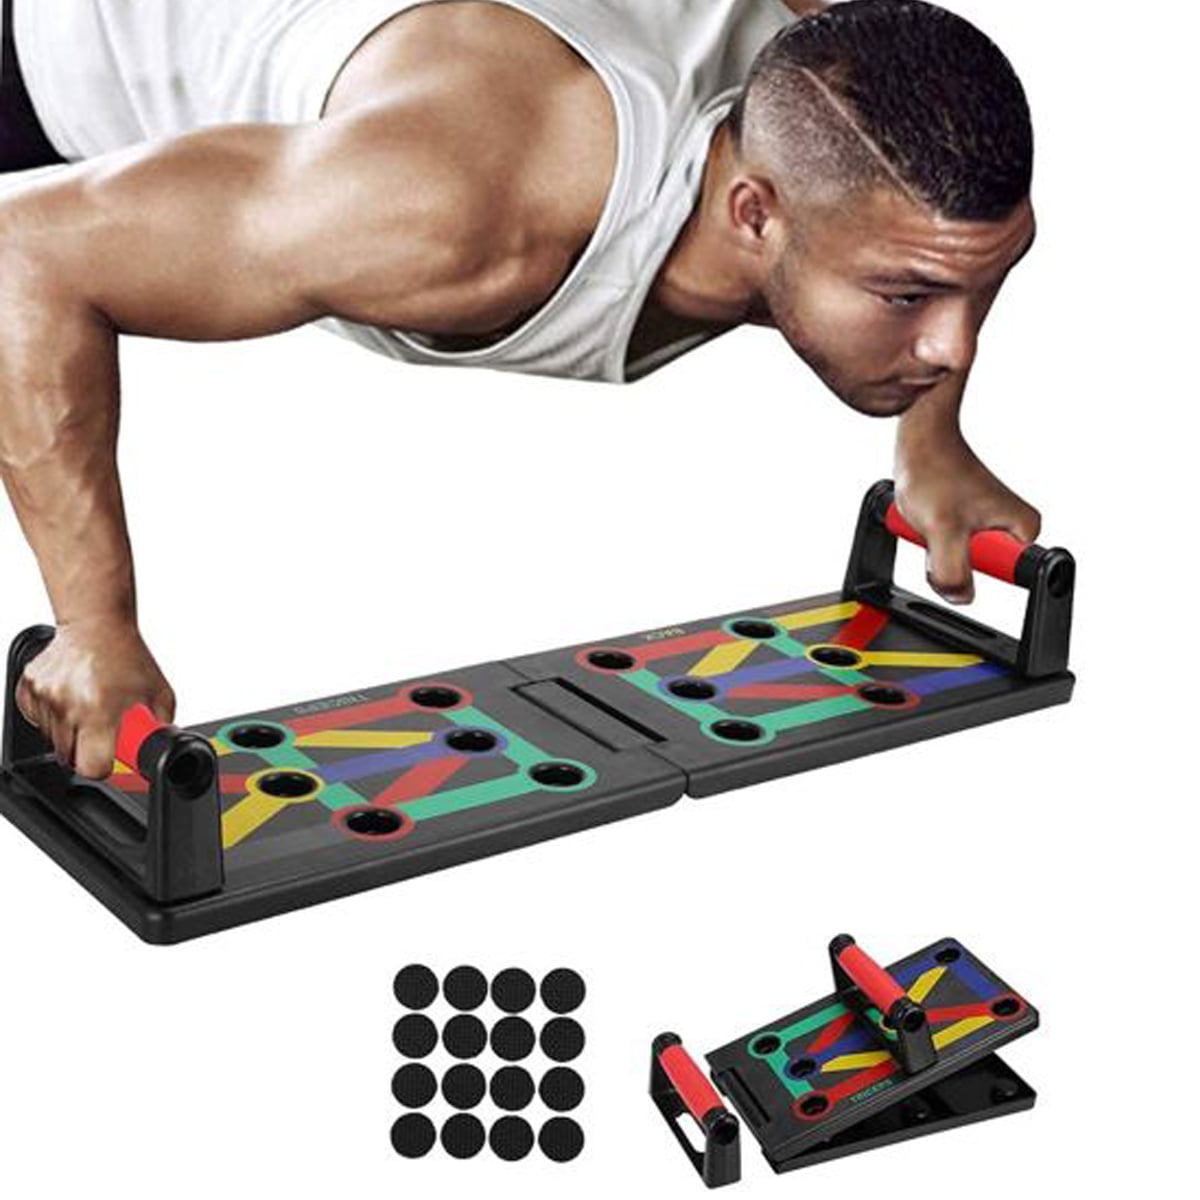 Foldable Press Up Rack Board Workout Exercise Portable Equipment Fitness for Men Women Gym Home Exercise Set with Resistance Bands Frunimall Push Up Board